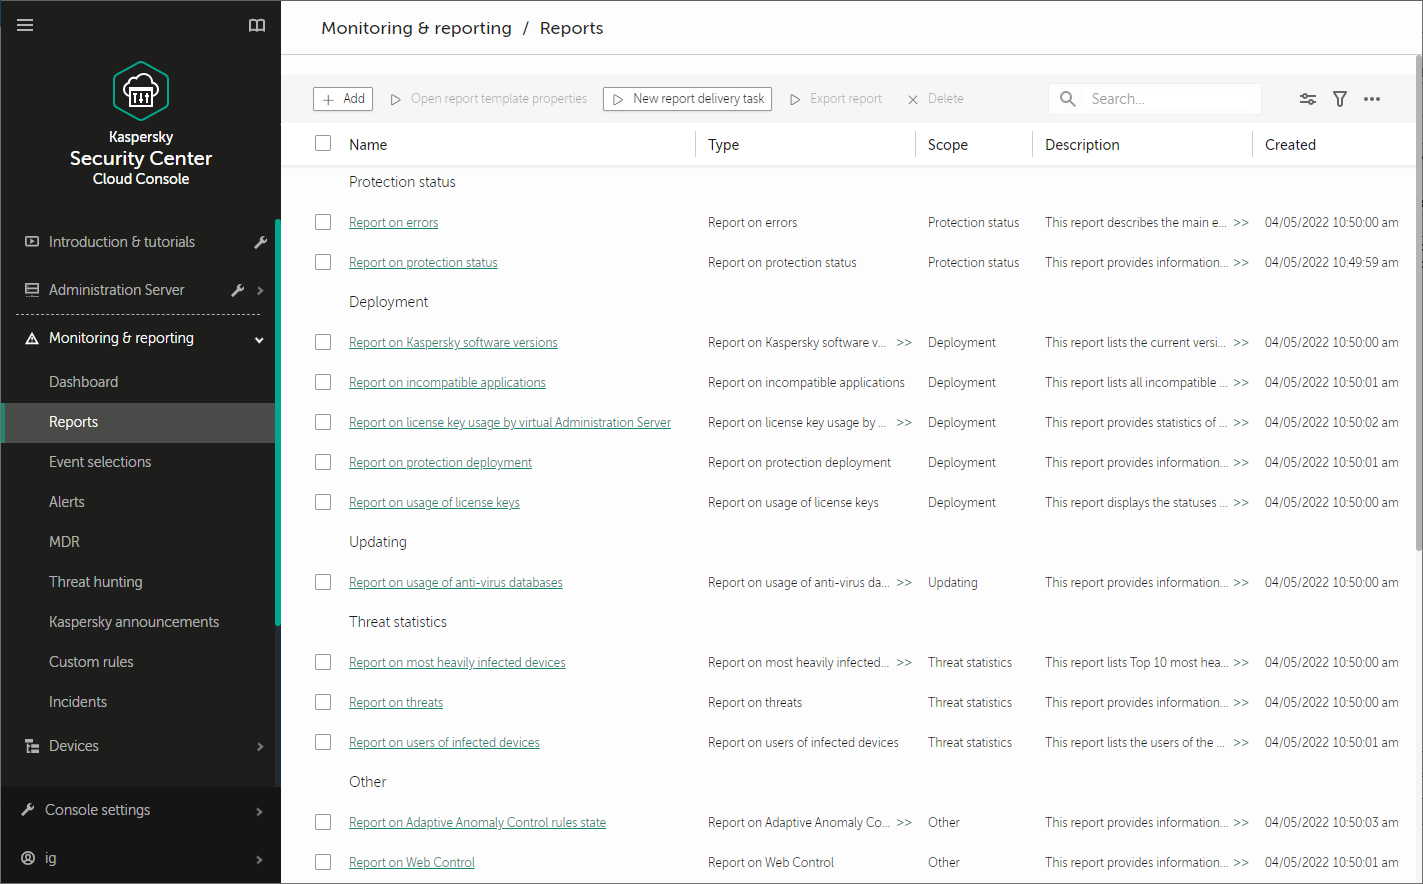 The Reports section contains a list of reports. You can manage the report list and configure each report.